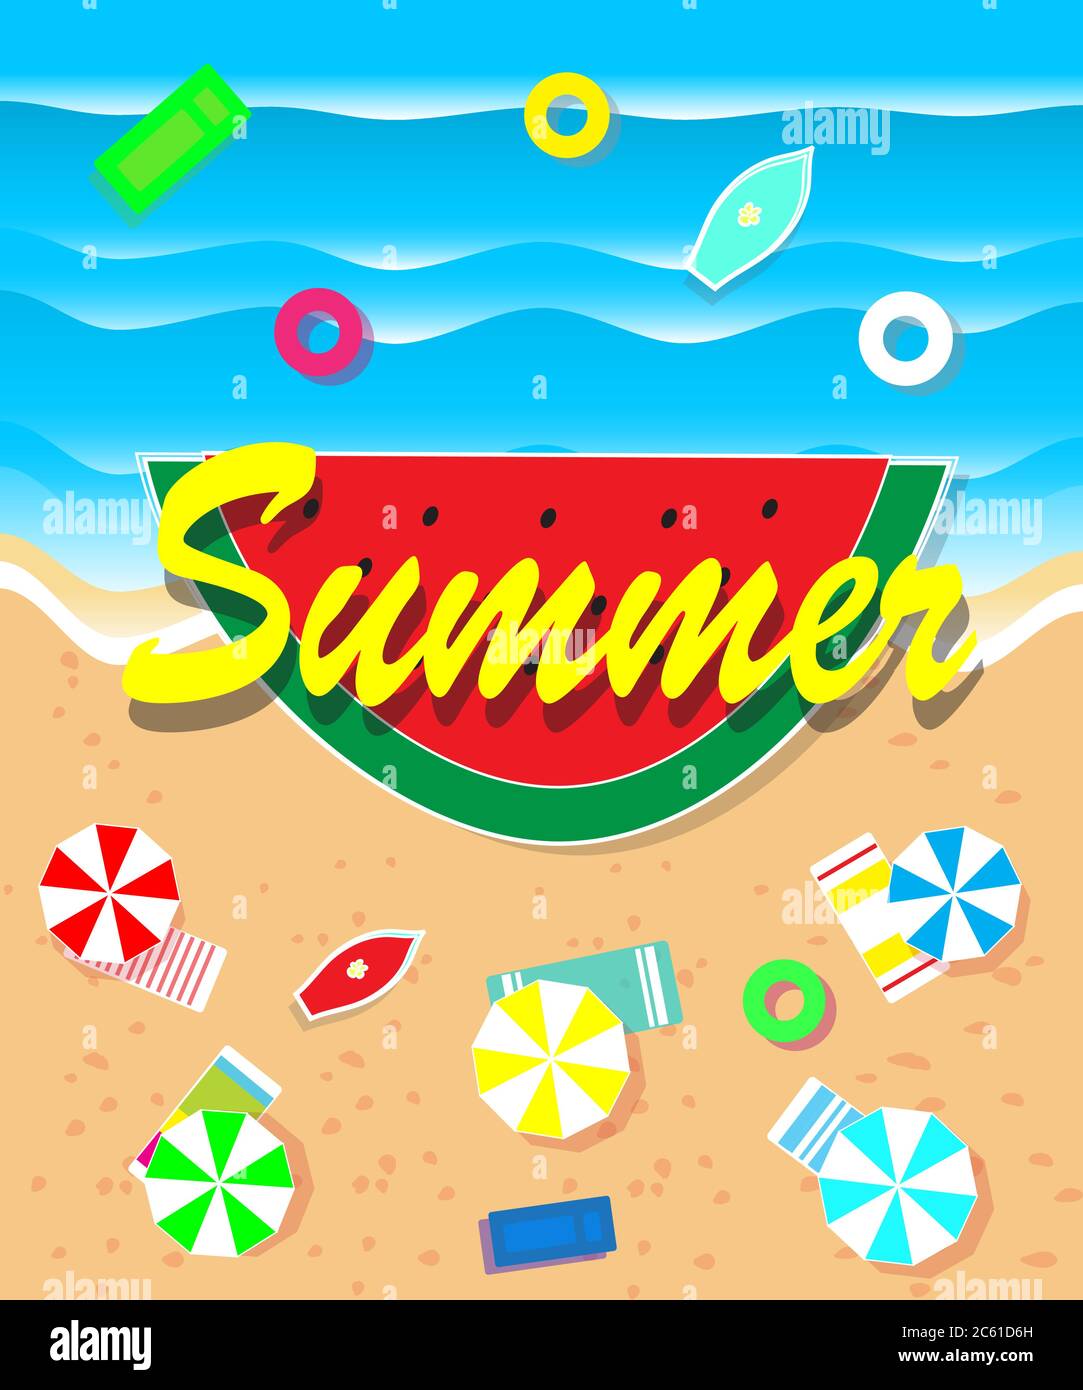 Summer beach vector background illustration layout poster Stock Vector